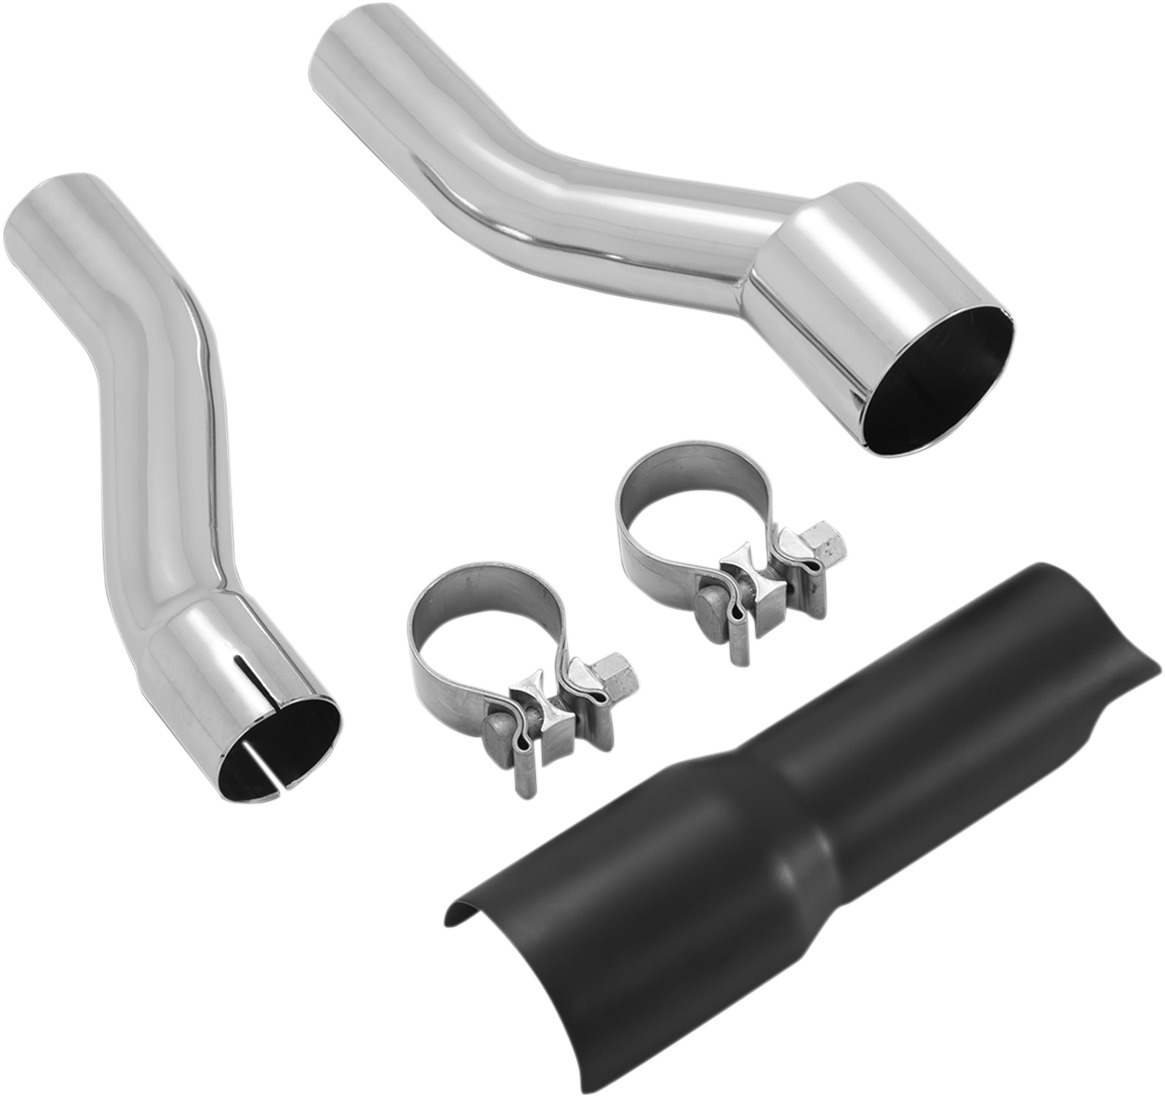 Headpipe Adapter Kit - For 17-19 Harley TriGlide Freewheeler - Click Image to Close